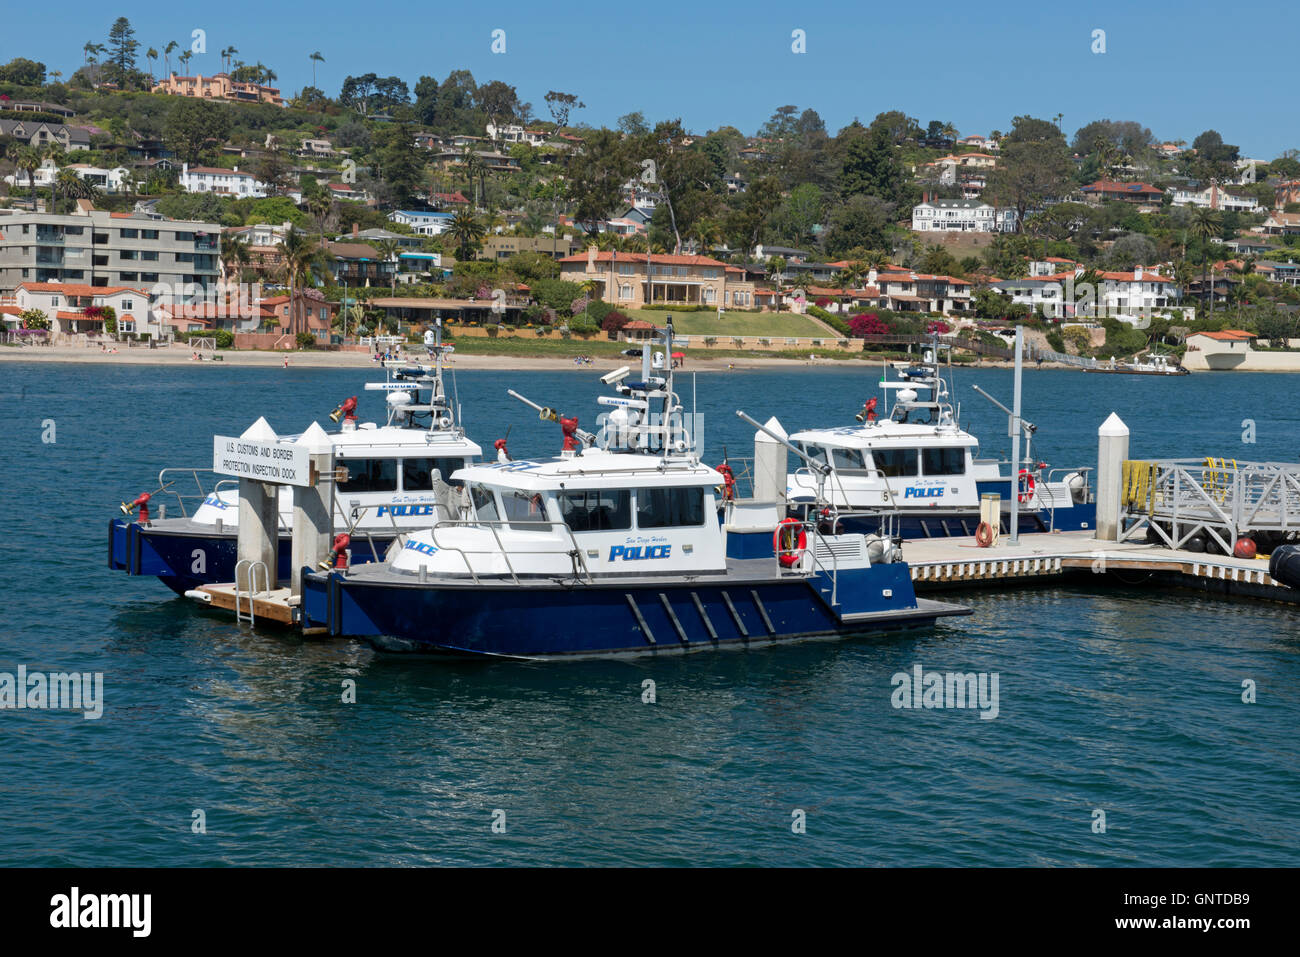 San Diego Harbor Police Boat Dock, Shelter Island (Point Loma in Background), San Diego Bay, San Diego, California Stock Photo